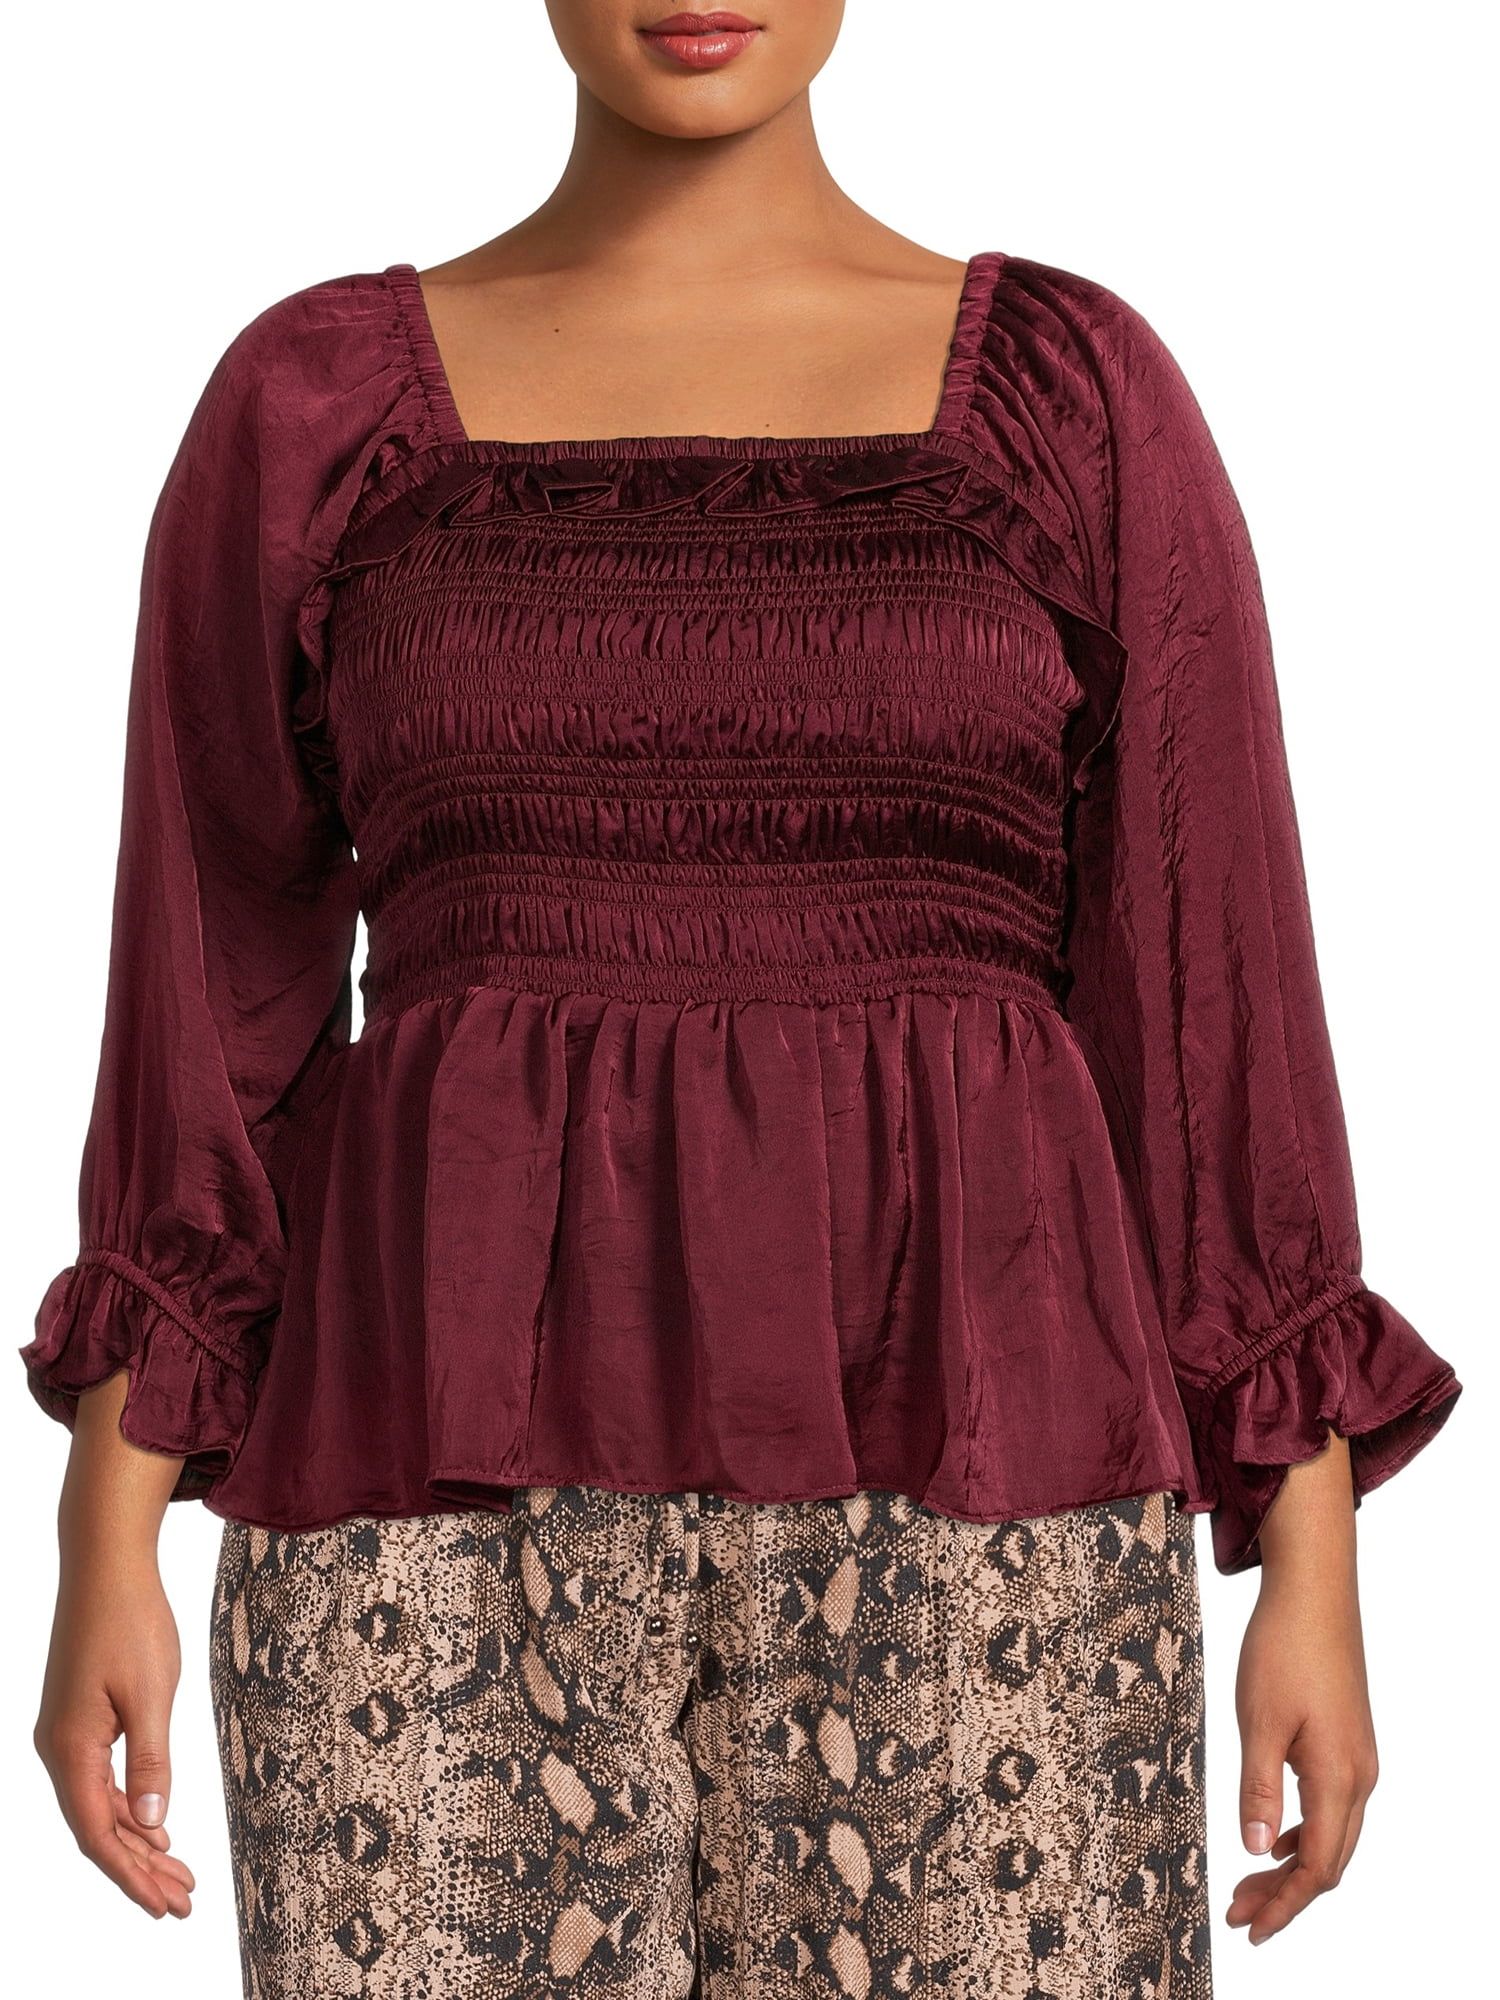 Romantic Gypsy Women's Plus Size Hammered Satin Square Neck Top | Walmart (US)